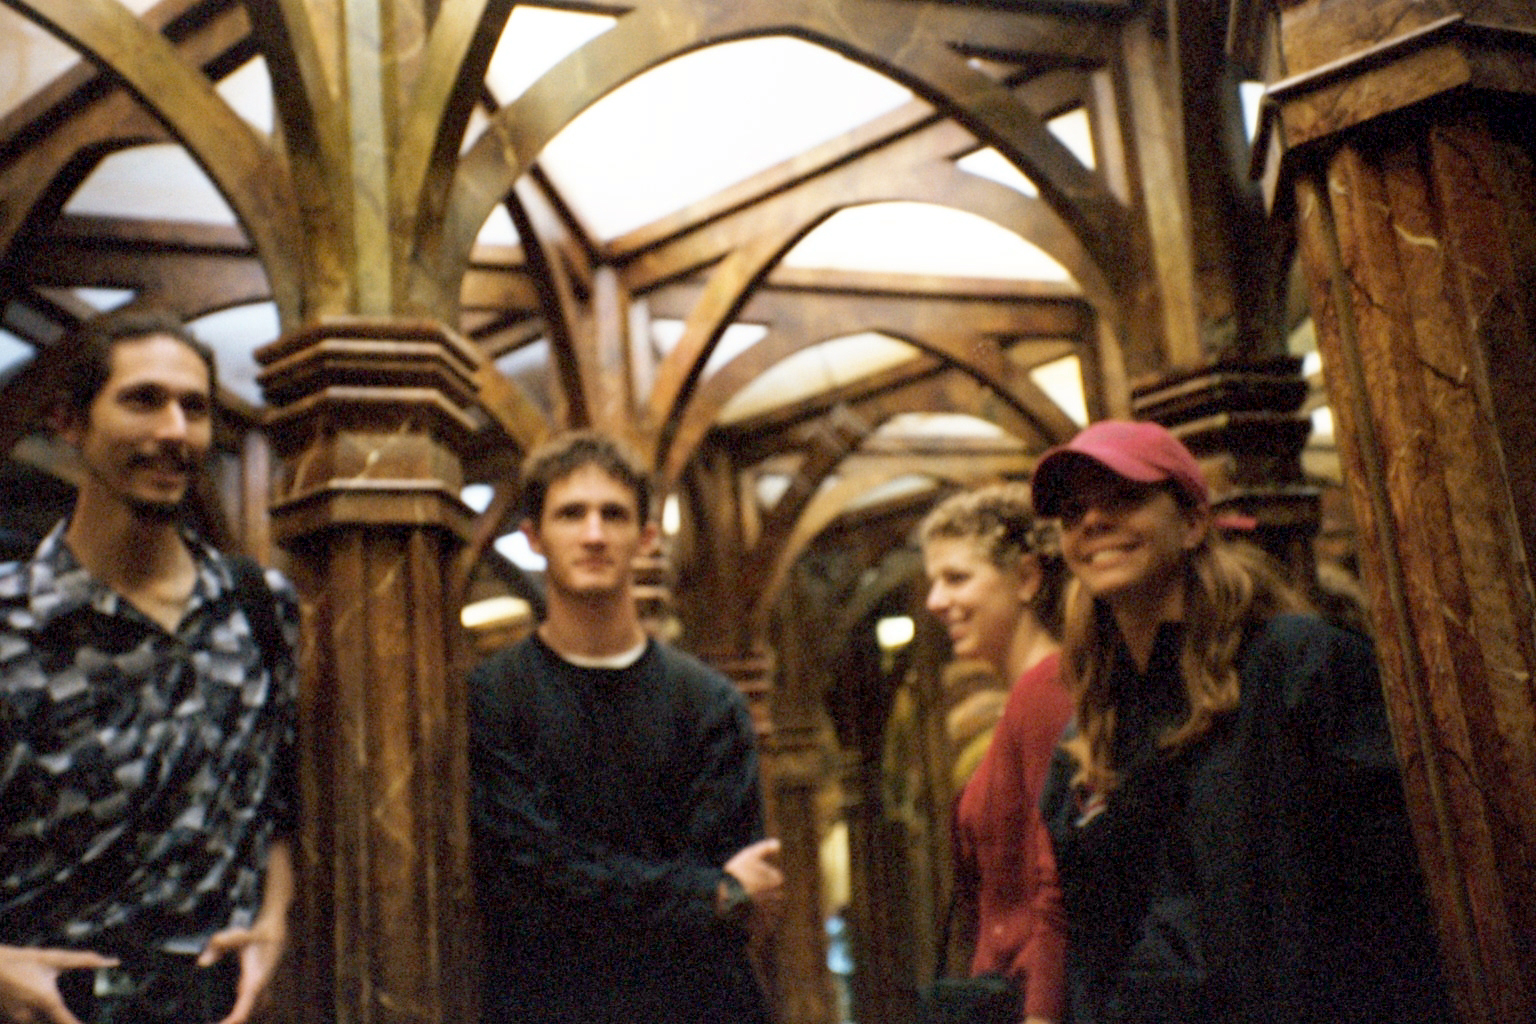 Vince, Ryan, Julie, and Debbie in a hall of mirrors